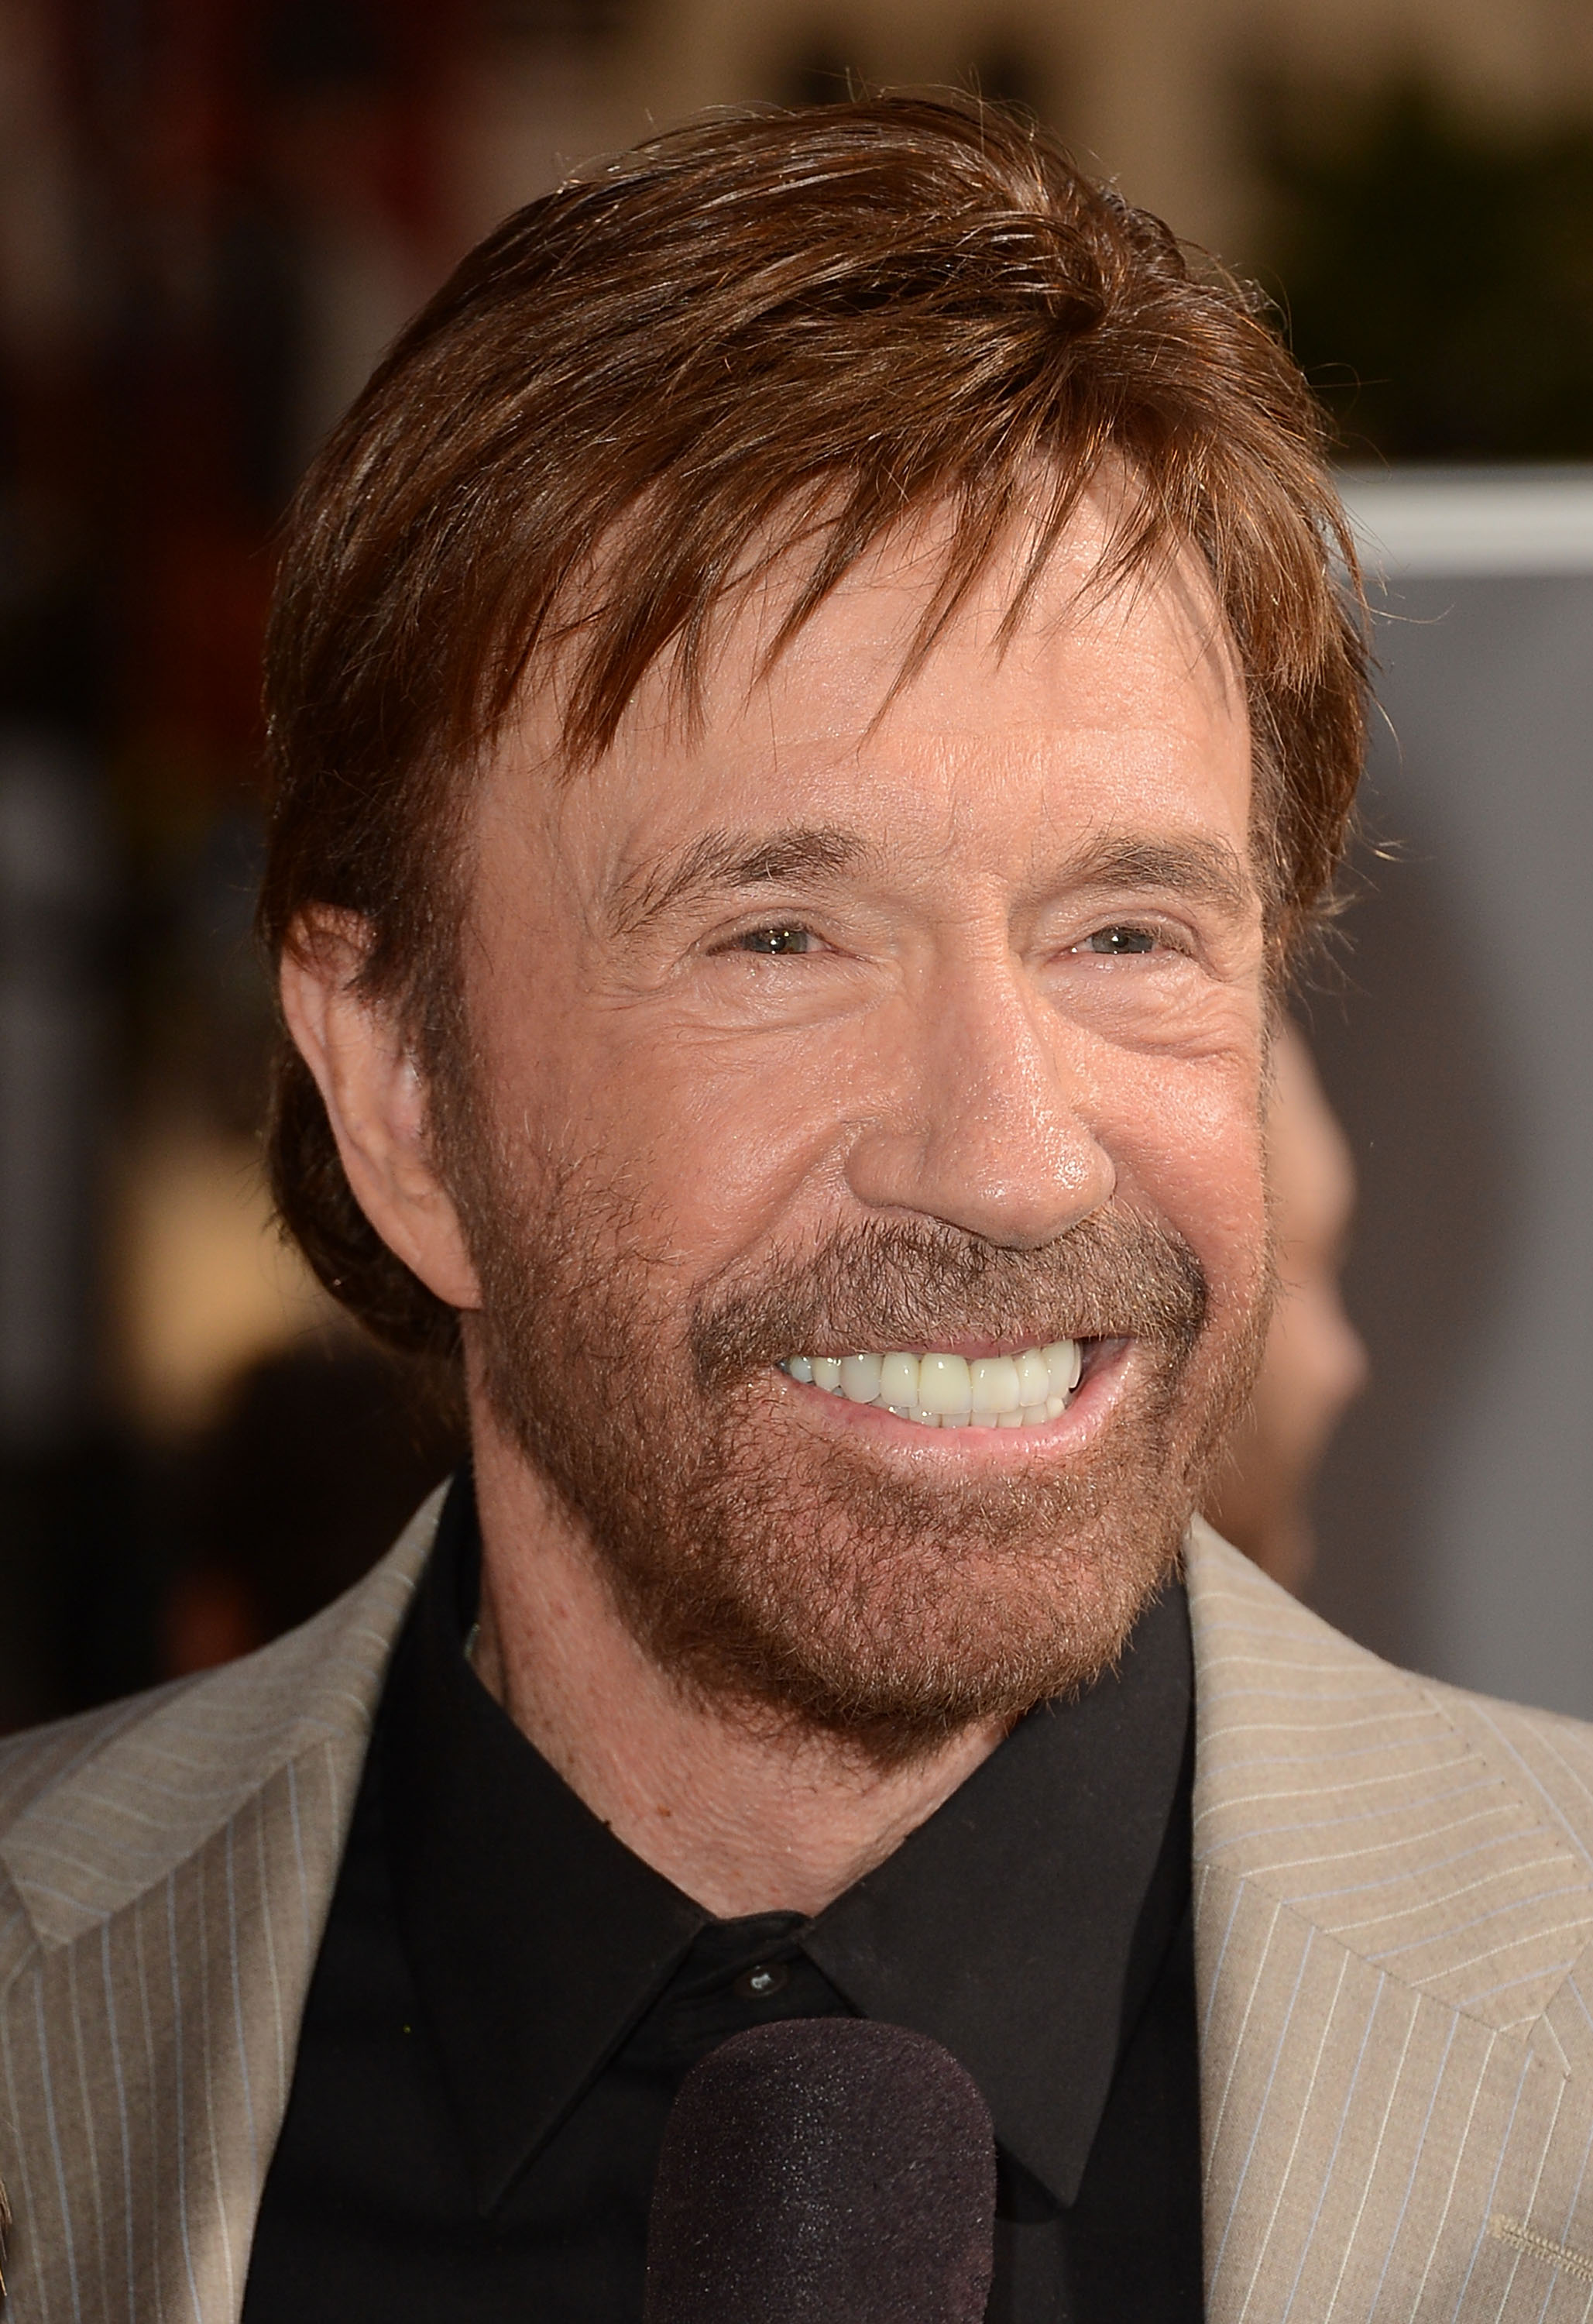 Chuck Norris arrives at Lionsgate Films' "The Expendables 2" premiere in Hollywood, California, on August 15, 2012. | Source: Getty Images